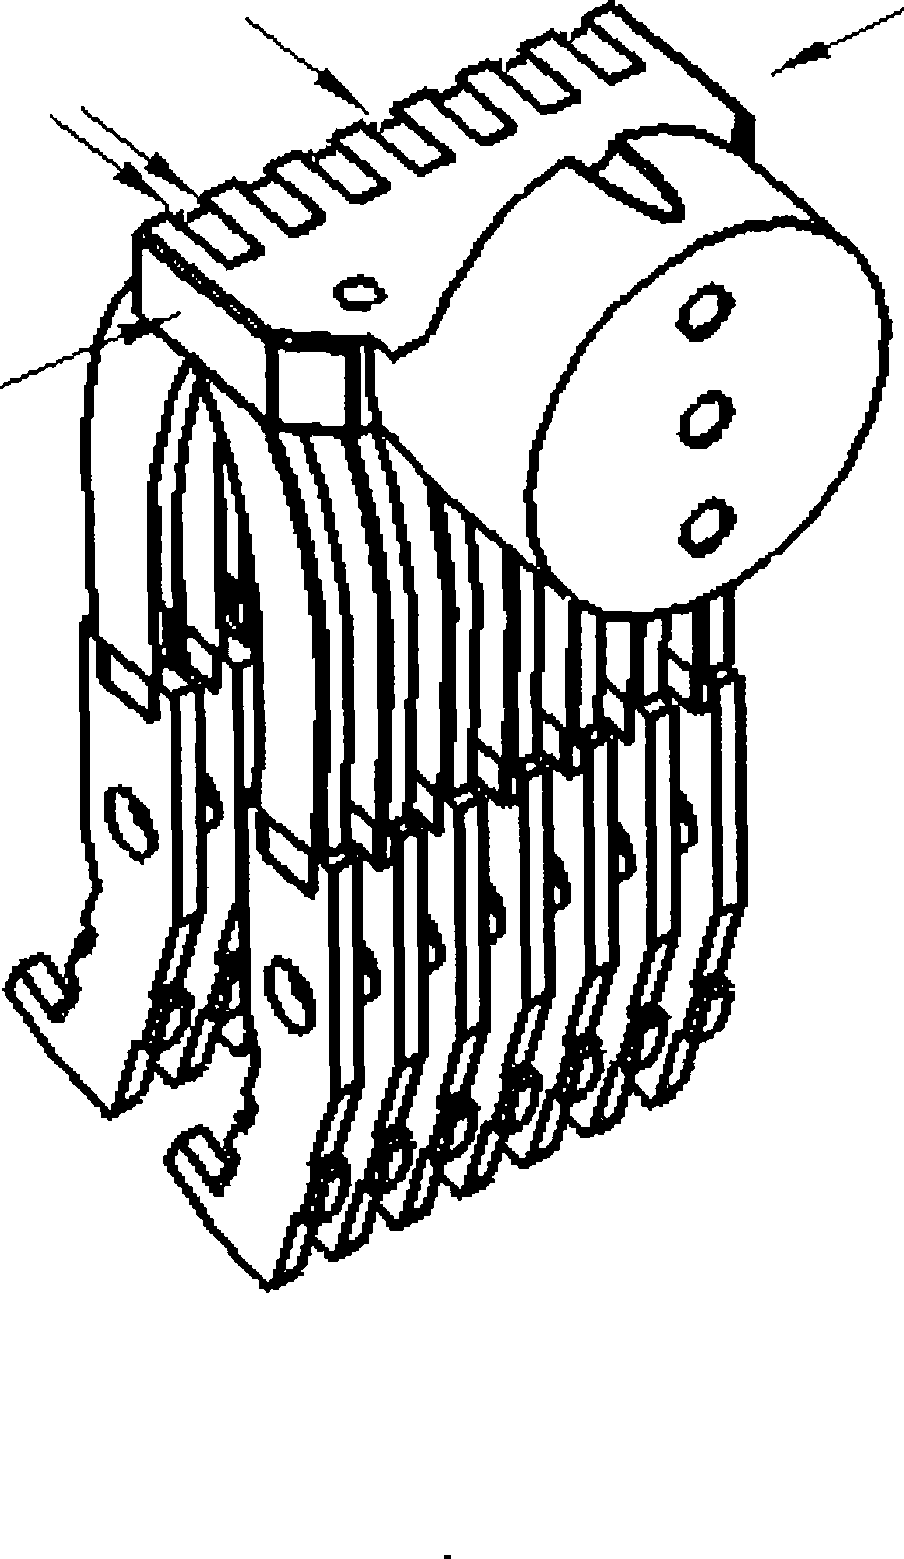 Dynamic-contact braided-line cold press of circuit breaker